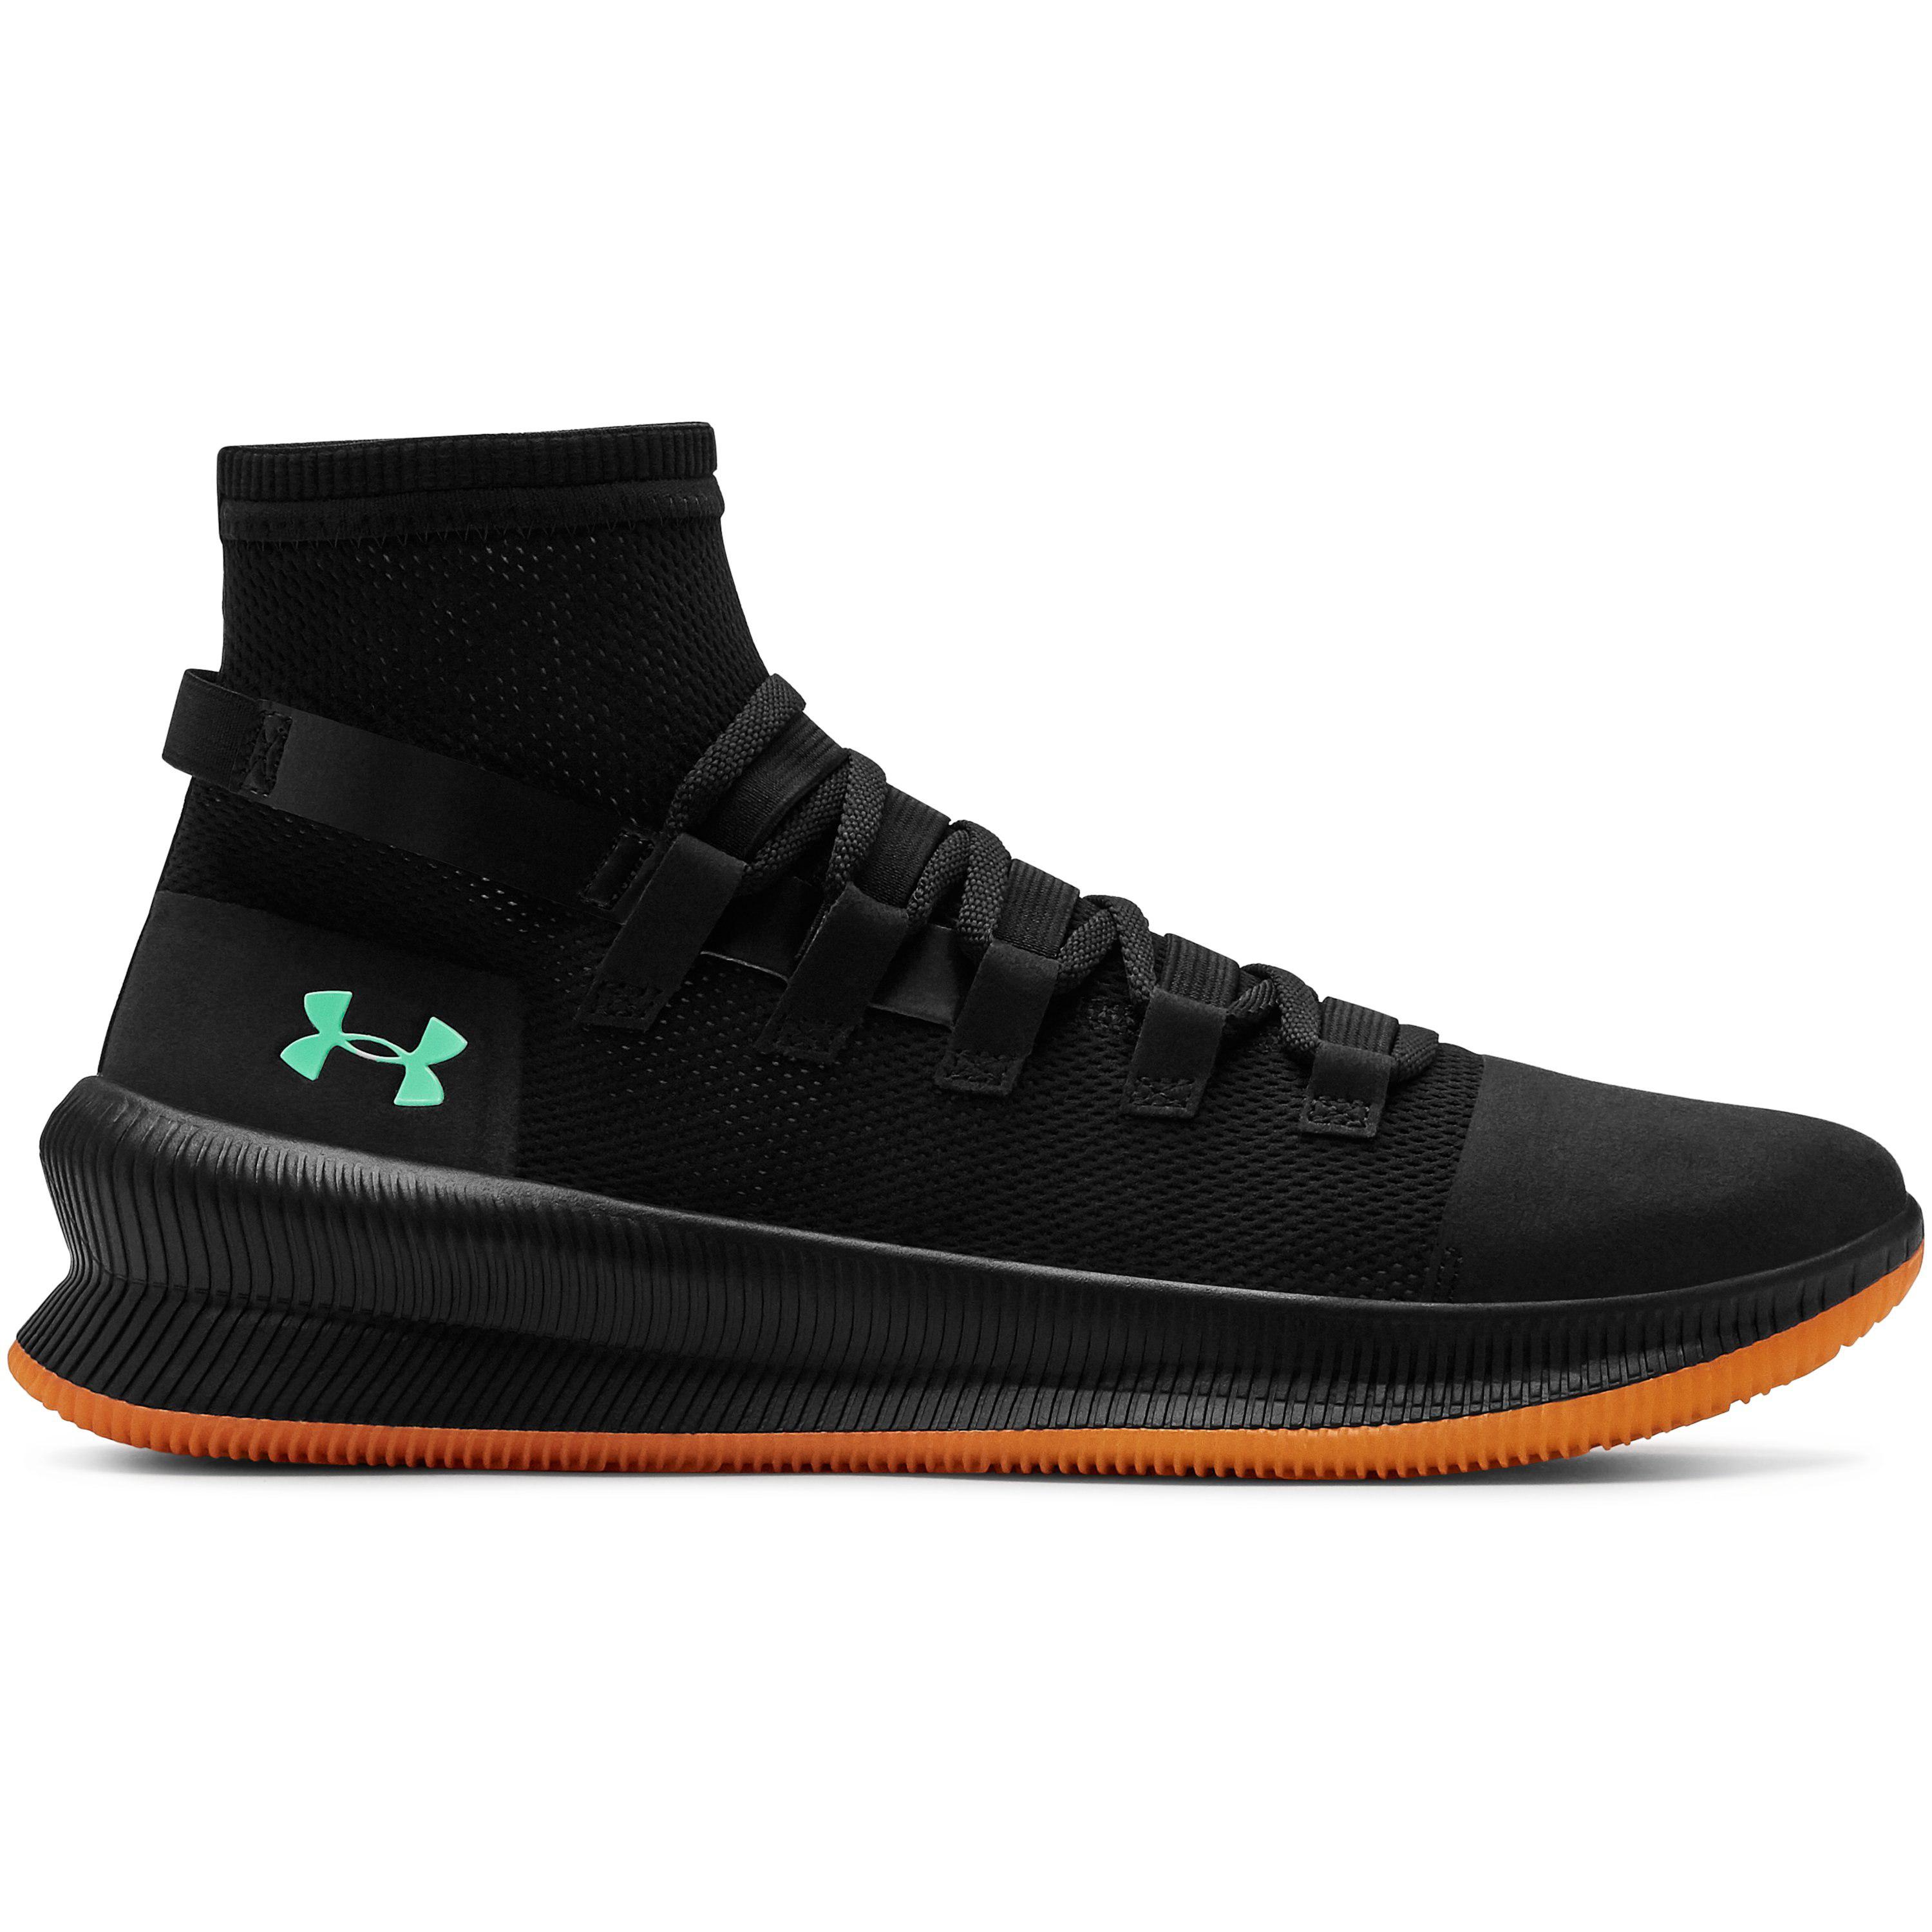 Under Armour Mens M-Tags Basketball Shoe